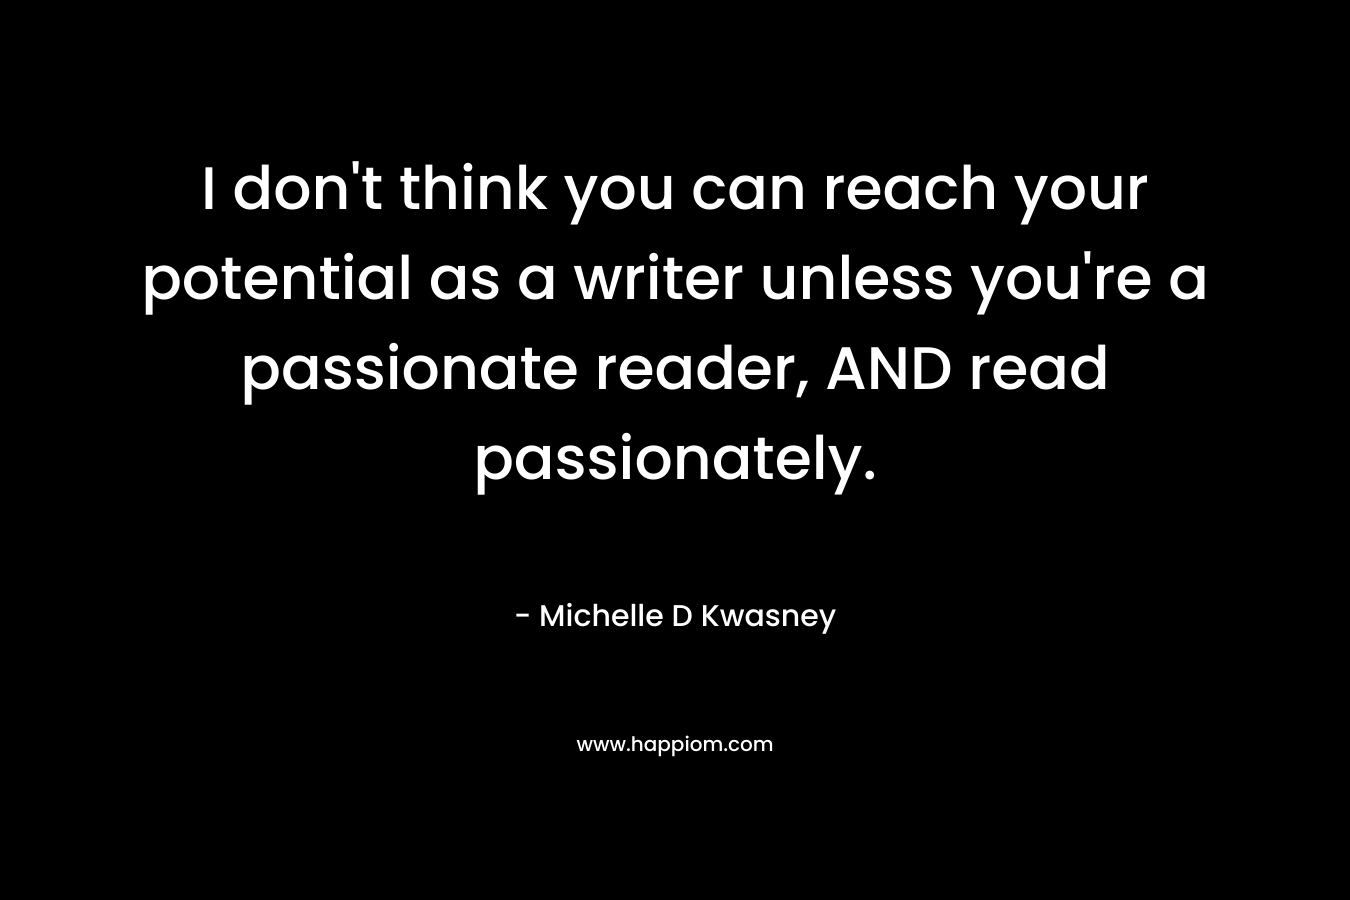 I don’t think you can reach your potential as a writer unless you’re a passionate reader, AND read passionately. – Michelle D Kwasney